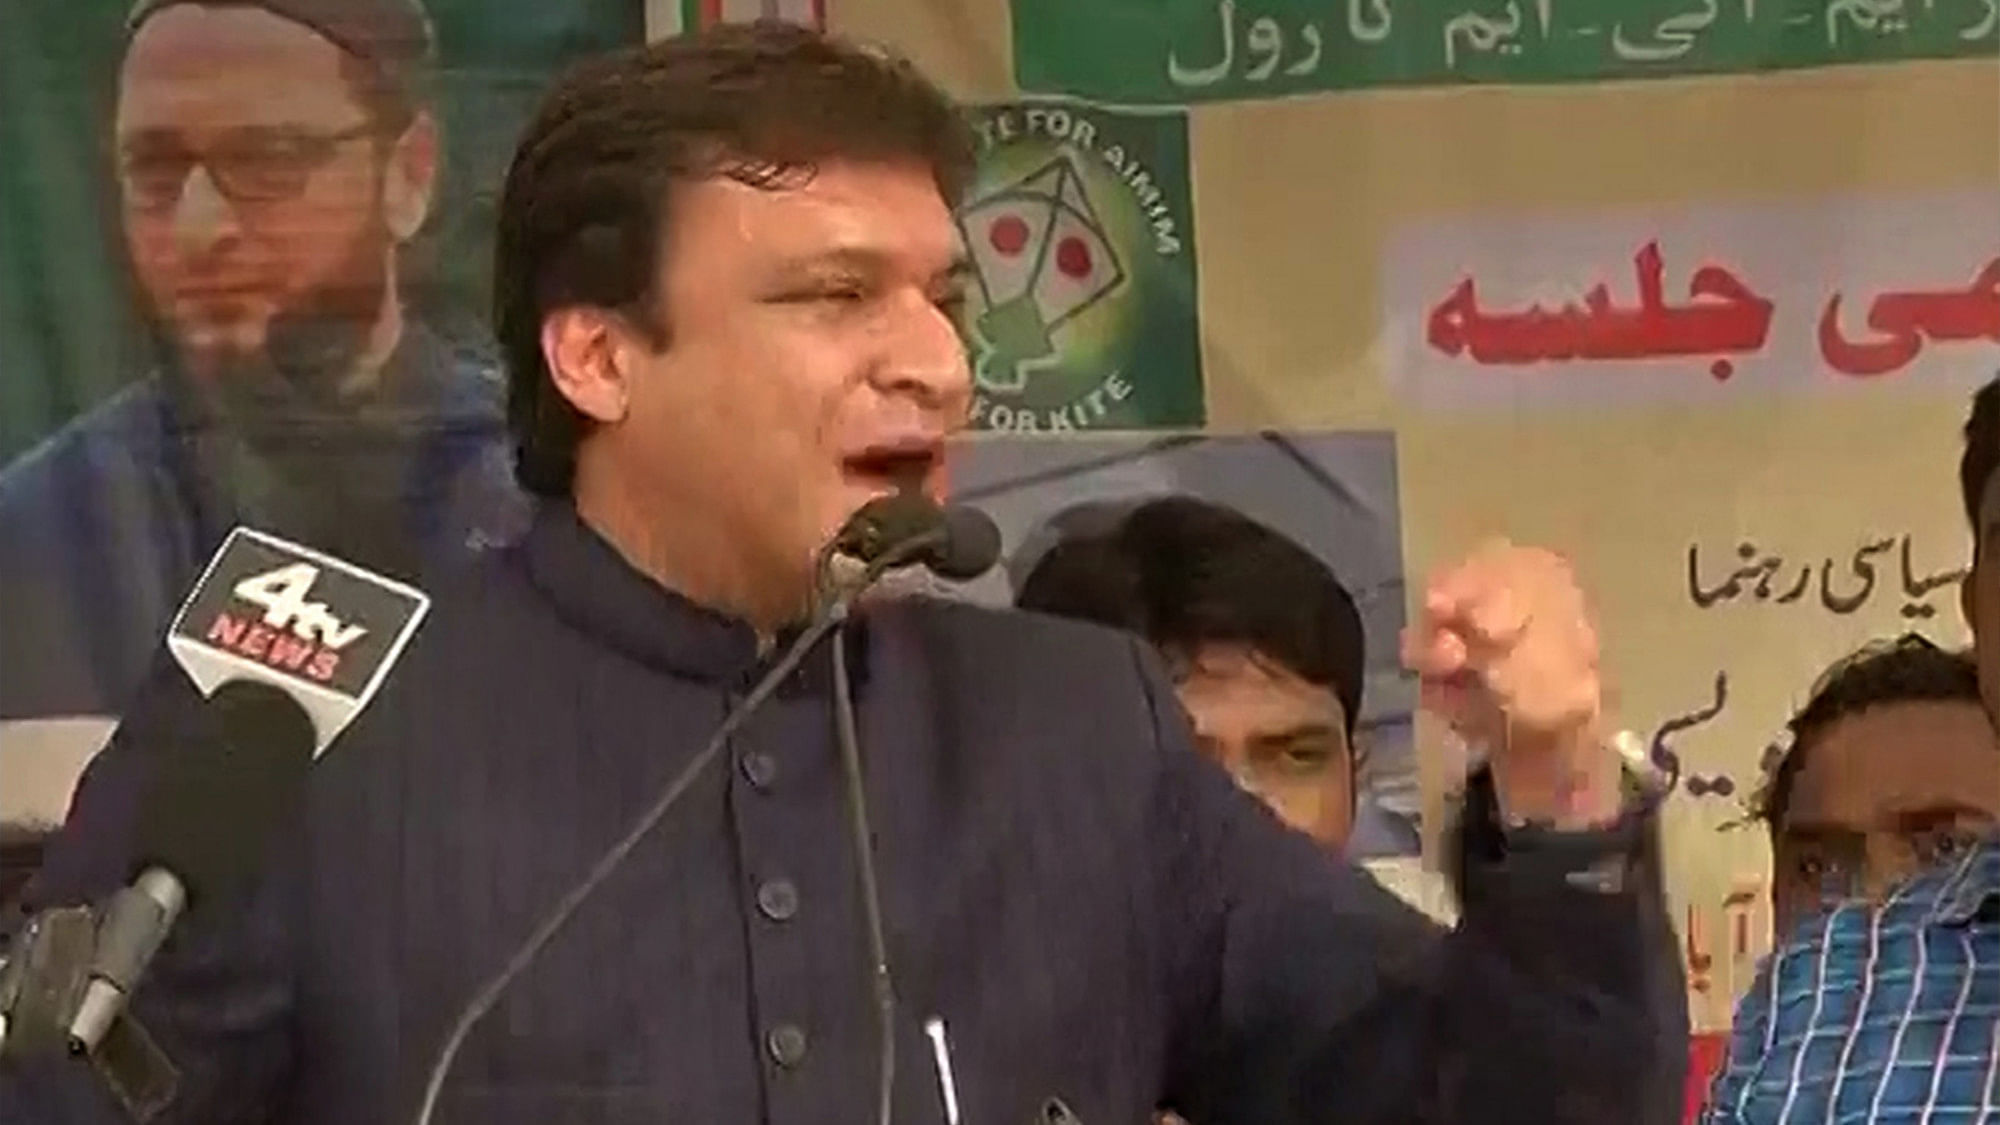 AIMIM leader Akbaruddin Owaisi at a rally in Kishanganj on Sunday, tore into the Lalu-Nitish alliance, claiming the duo have done nothing for Muslims in the state for the last 25 years. (Photo: ANI screengrab)